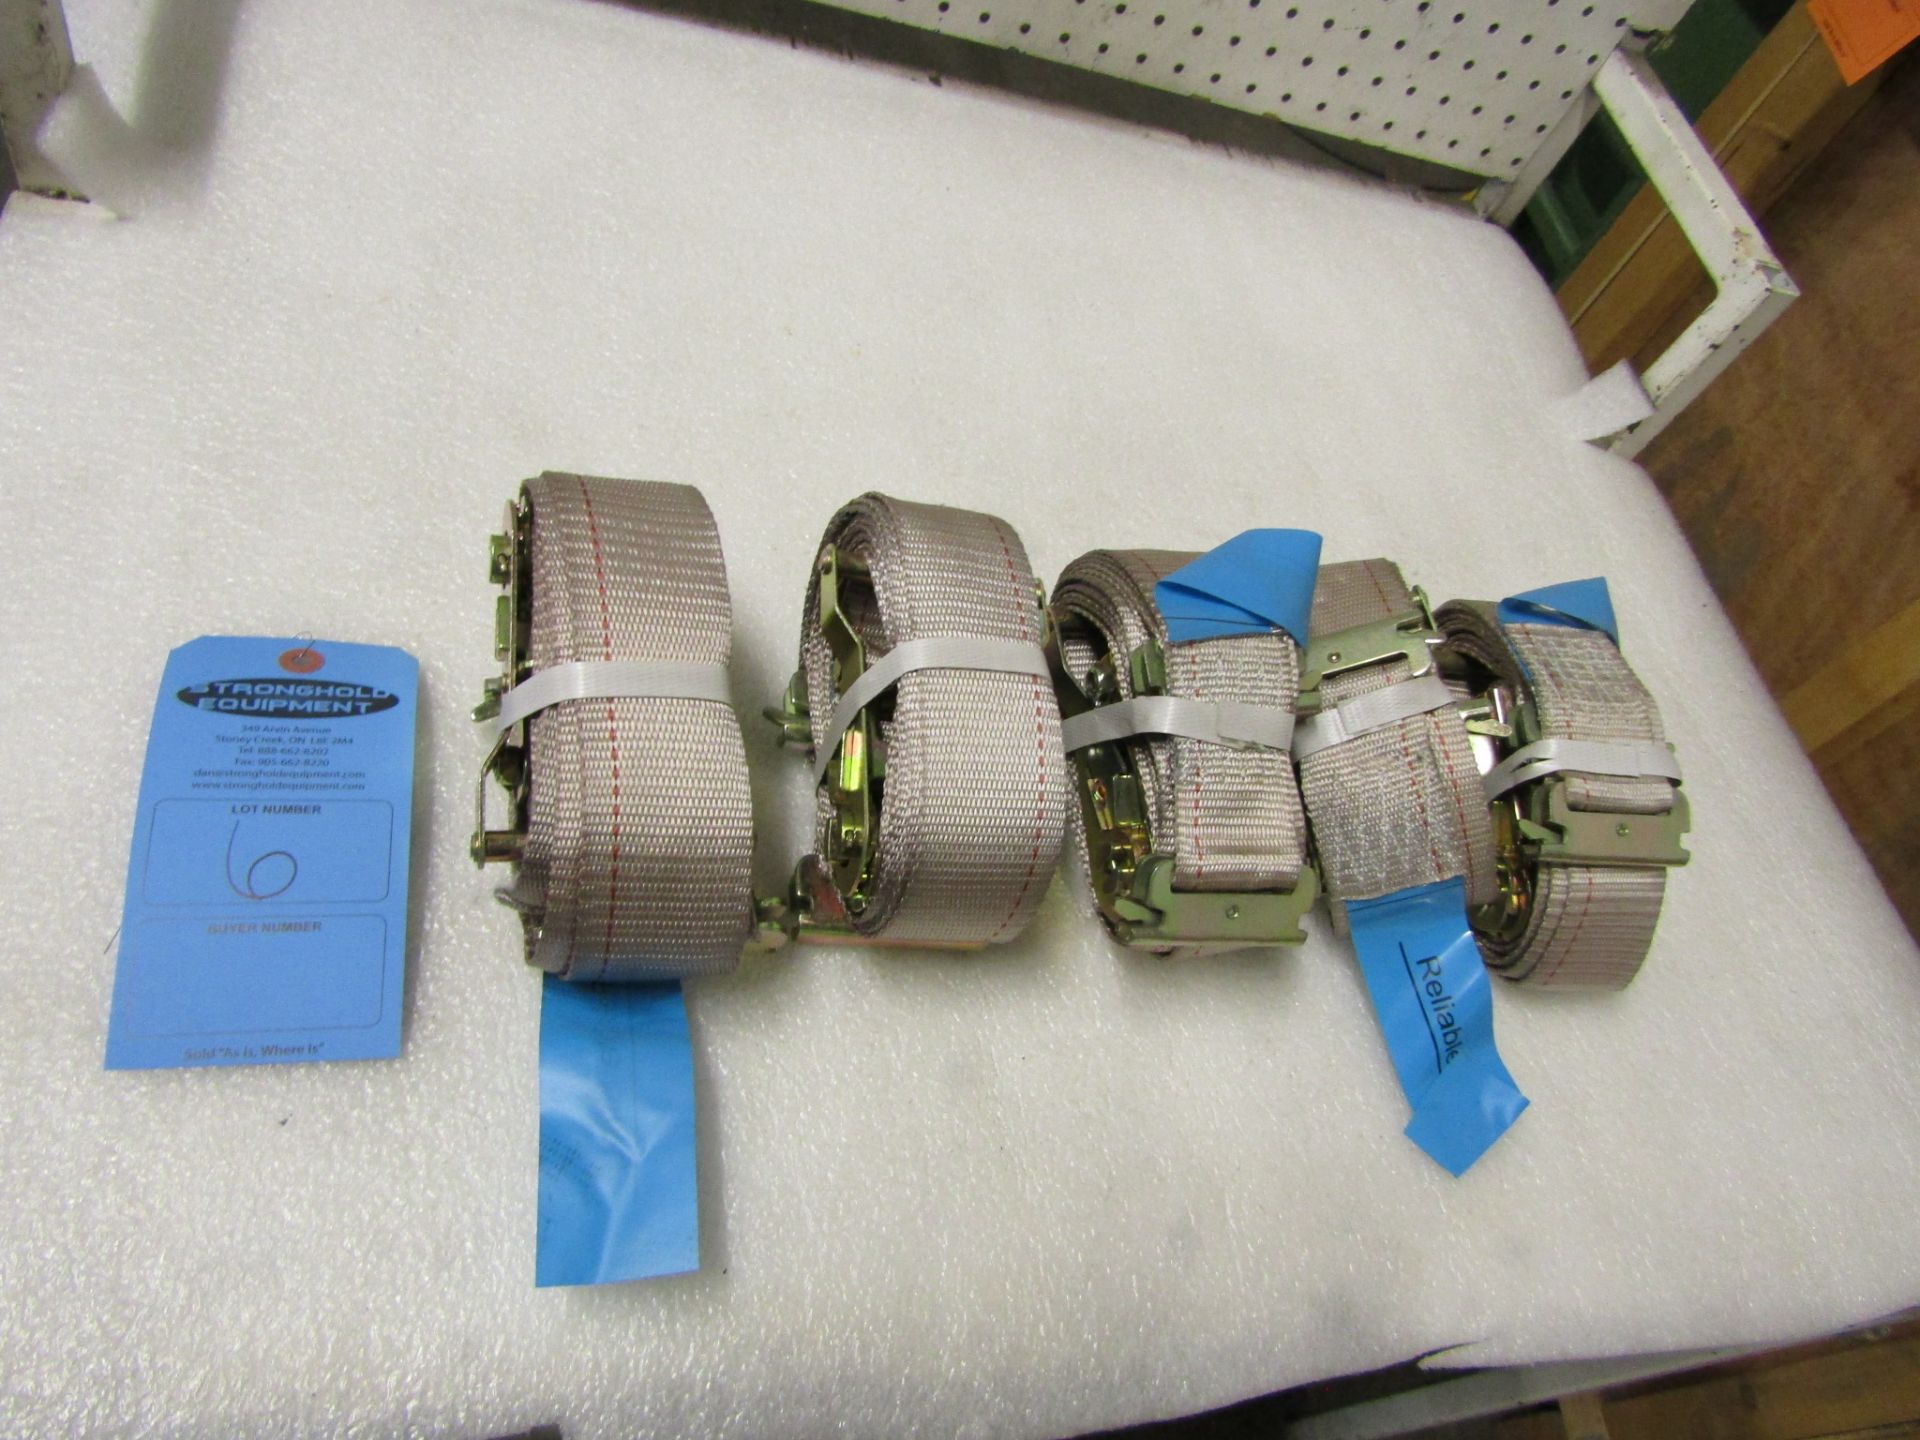 Lot of 5 (5 units) Tie Down Ratchet Straps for truck use 15' length BRAND NEW